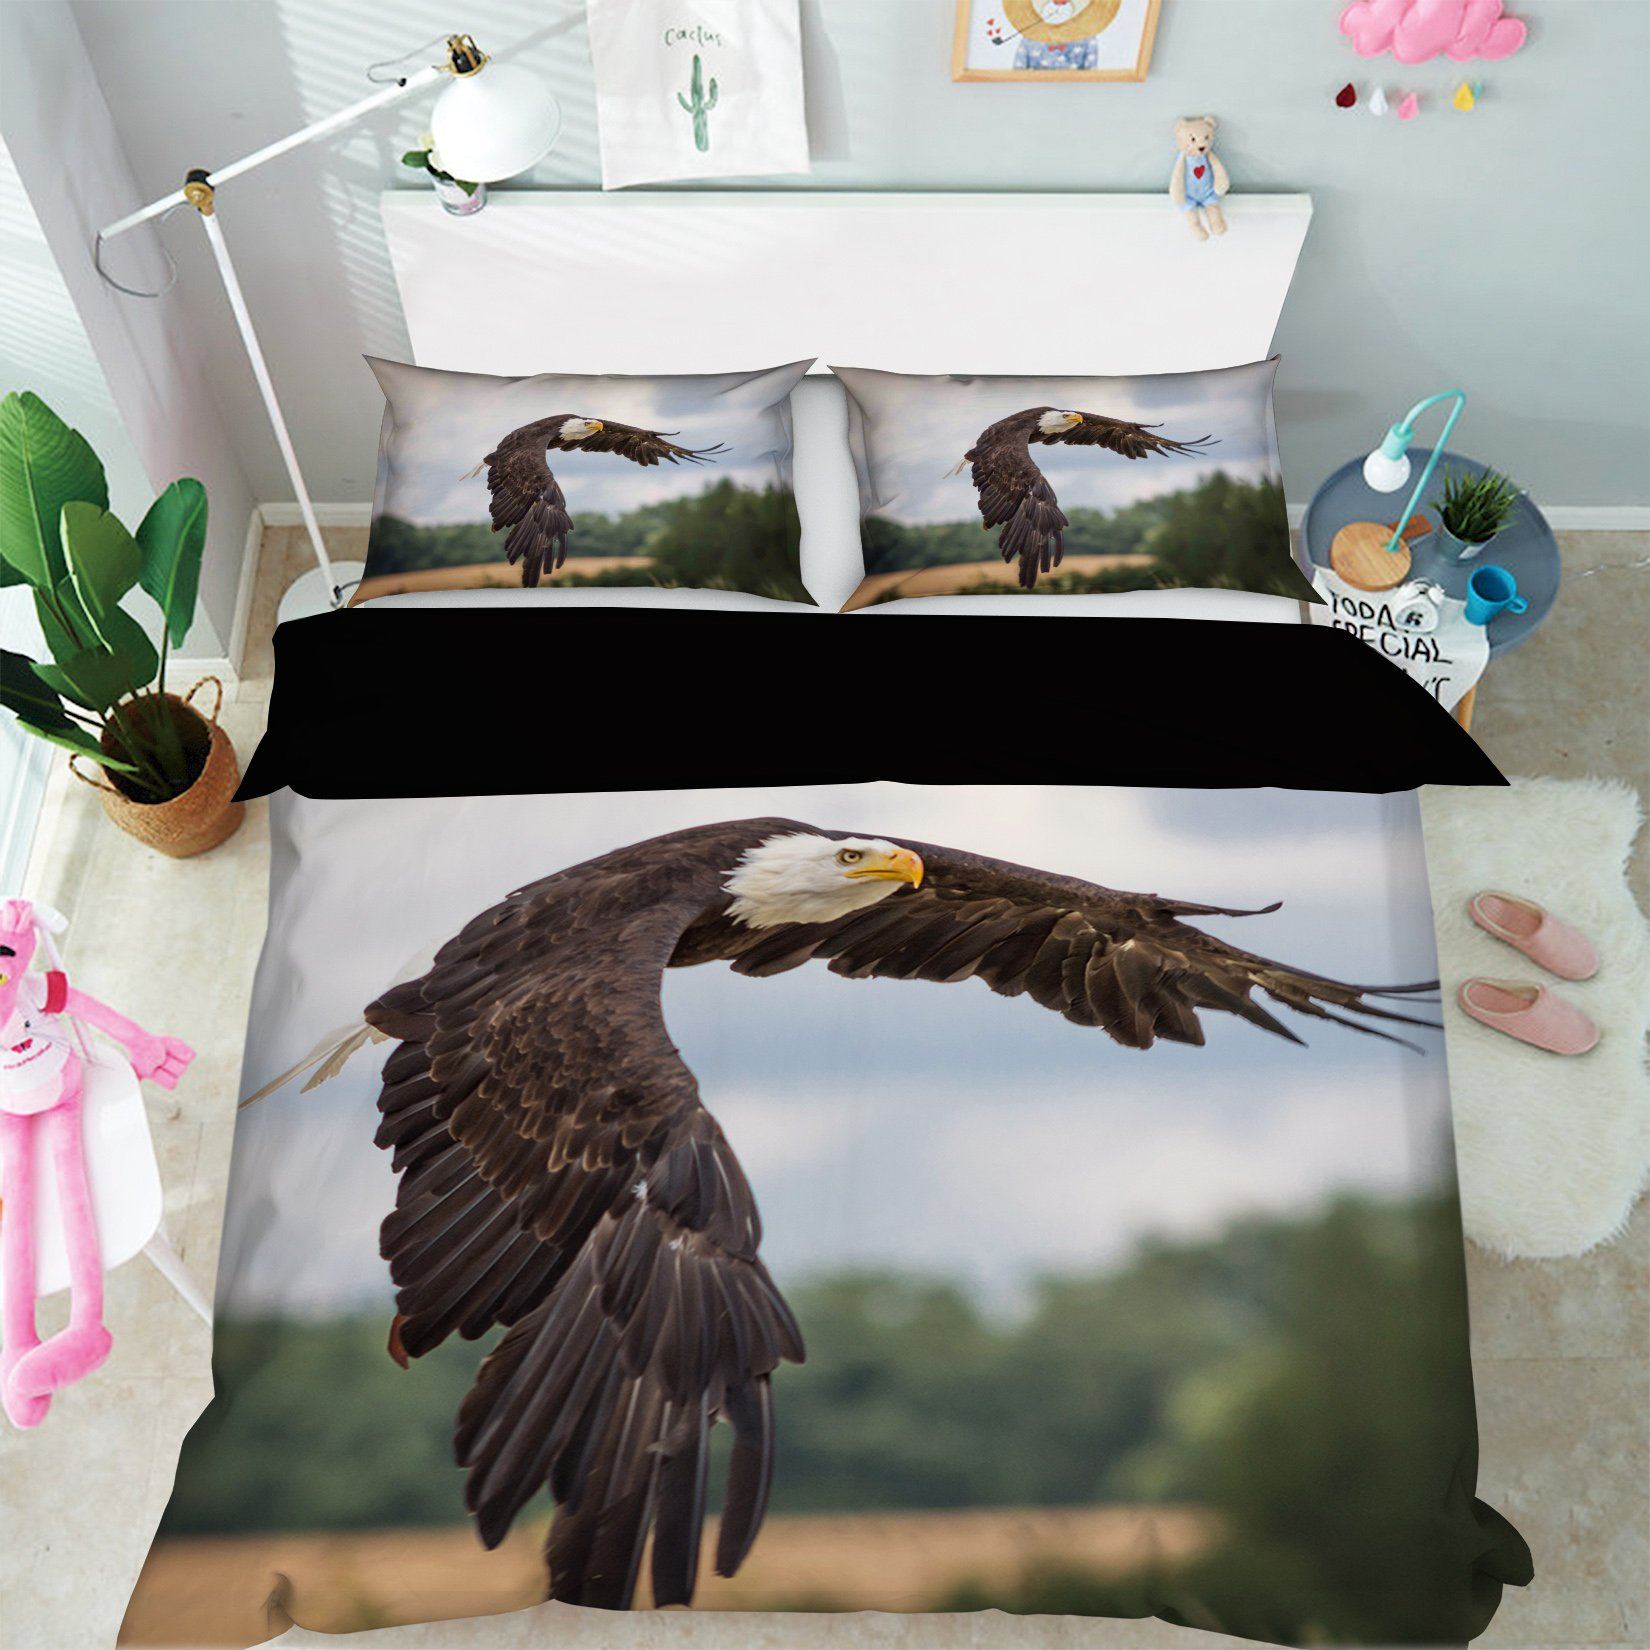 3D Eagle Spreading Wings 1910 Bed Pillowcases Quilt Quiet Covers AJ Creativity Home 